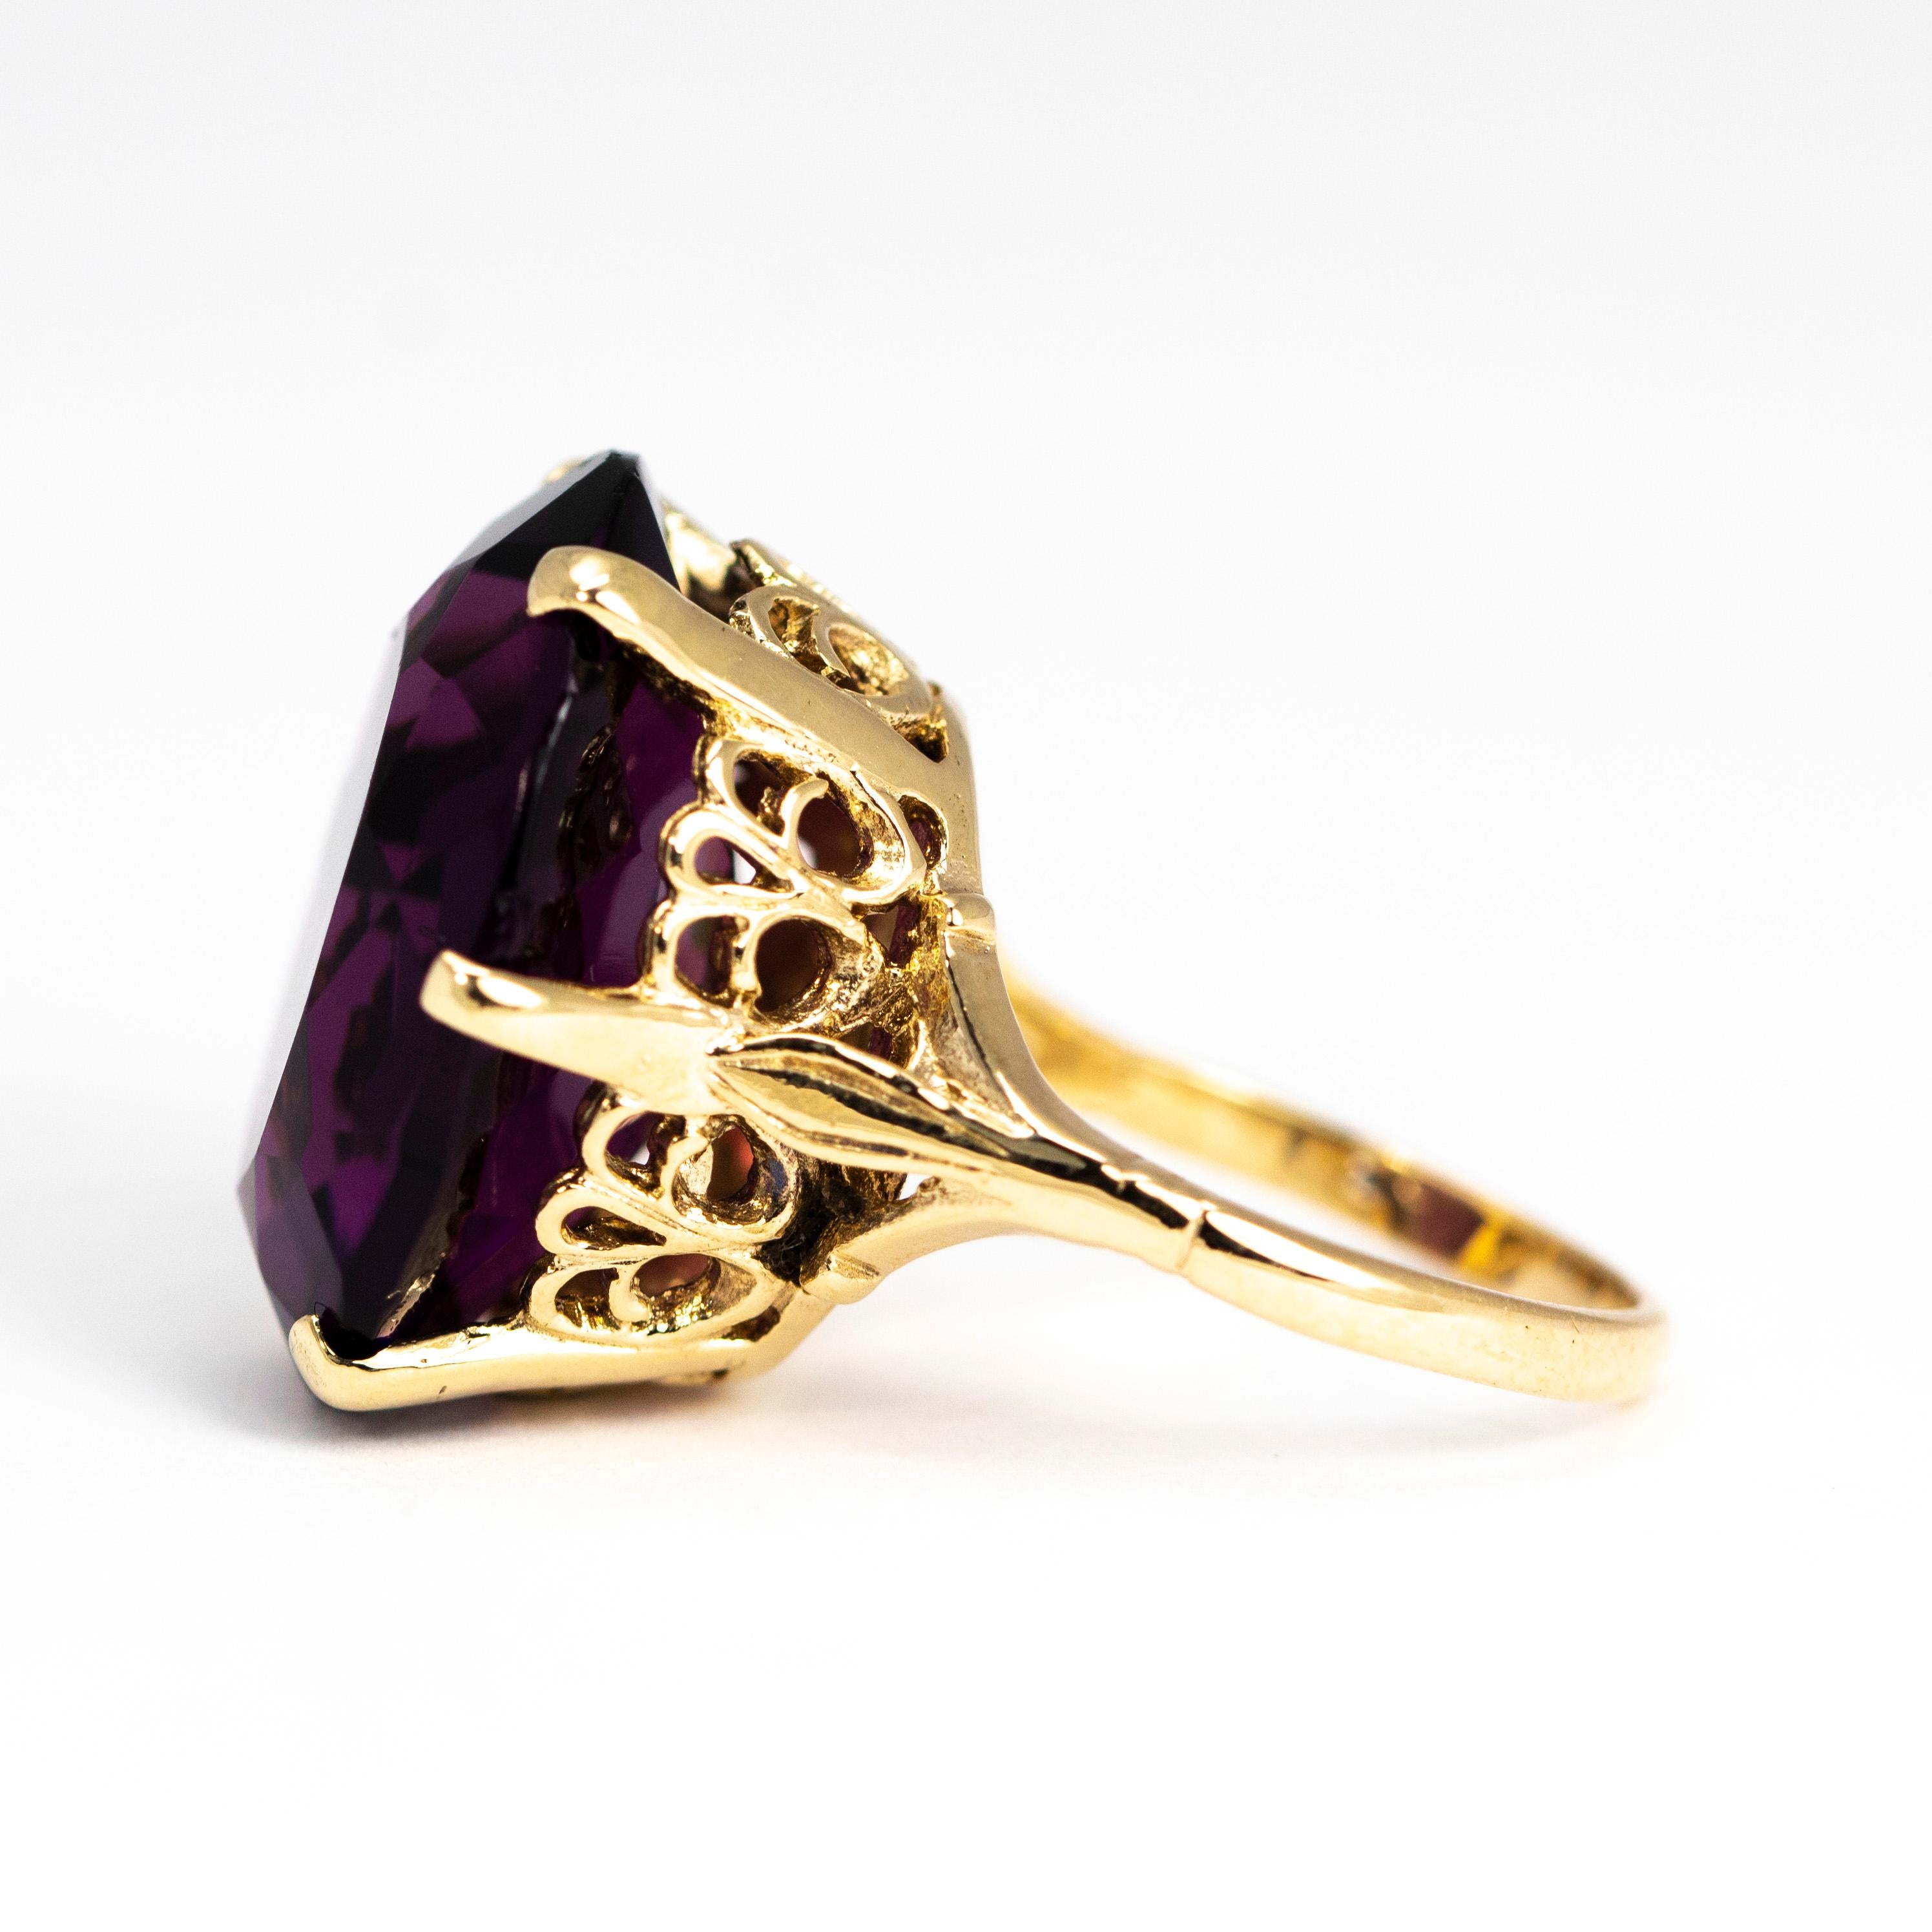 Modern Vintage Amethyst and 9 Carat Gold Cocktail Ring